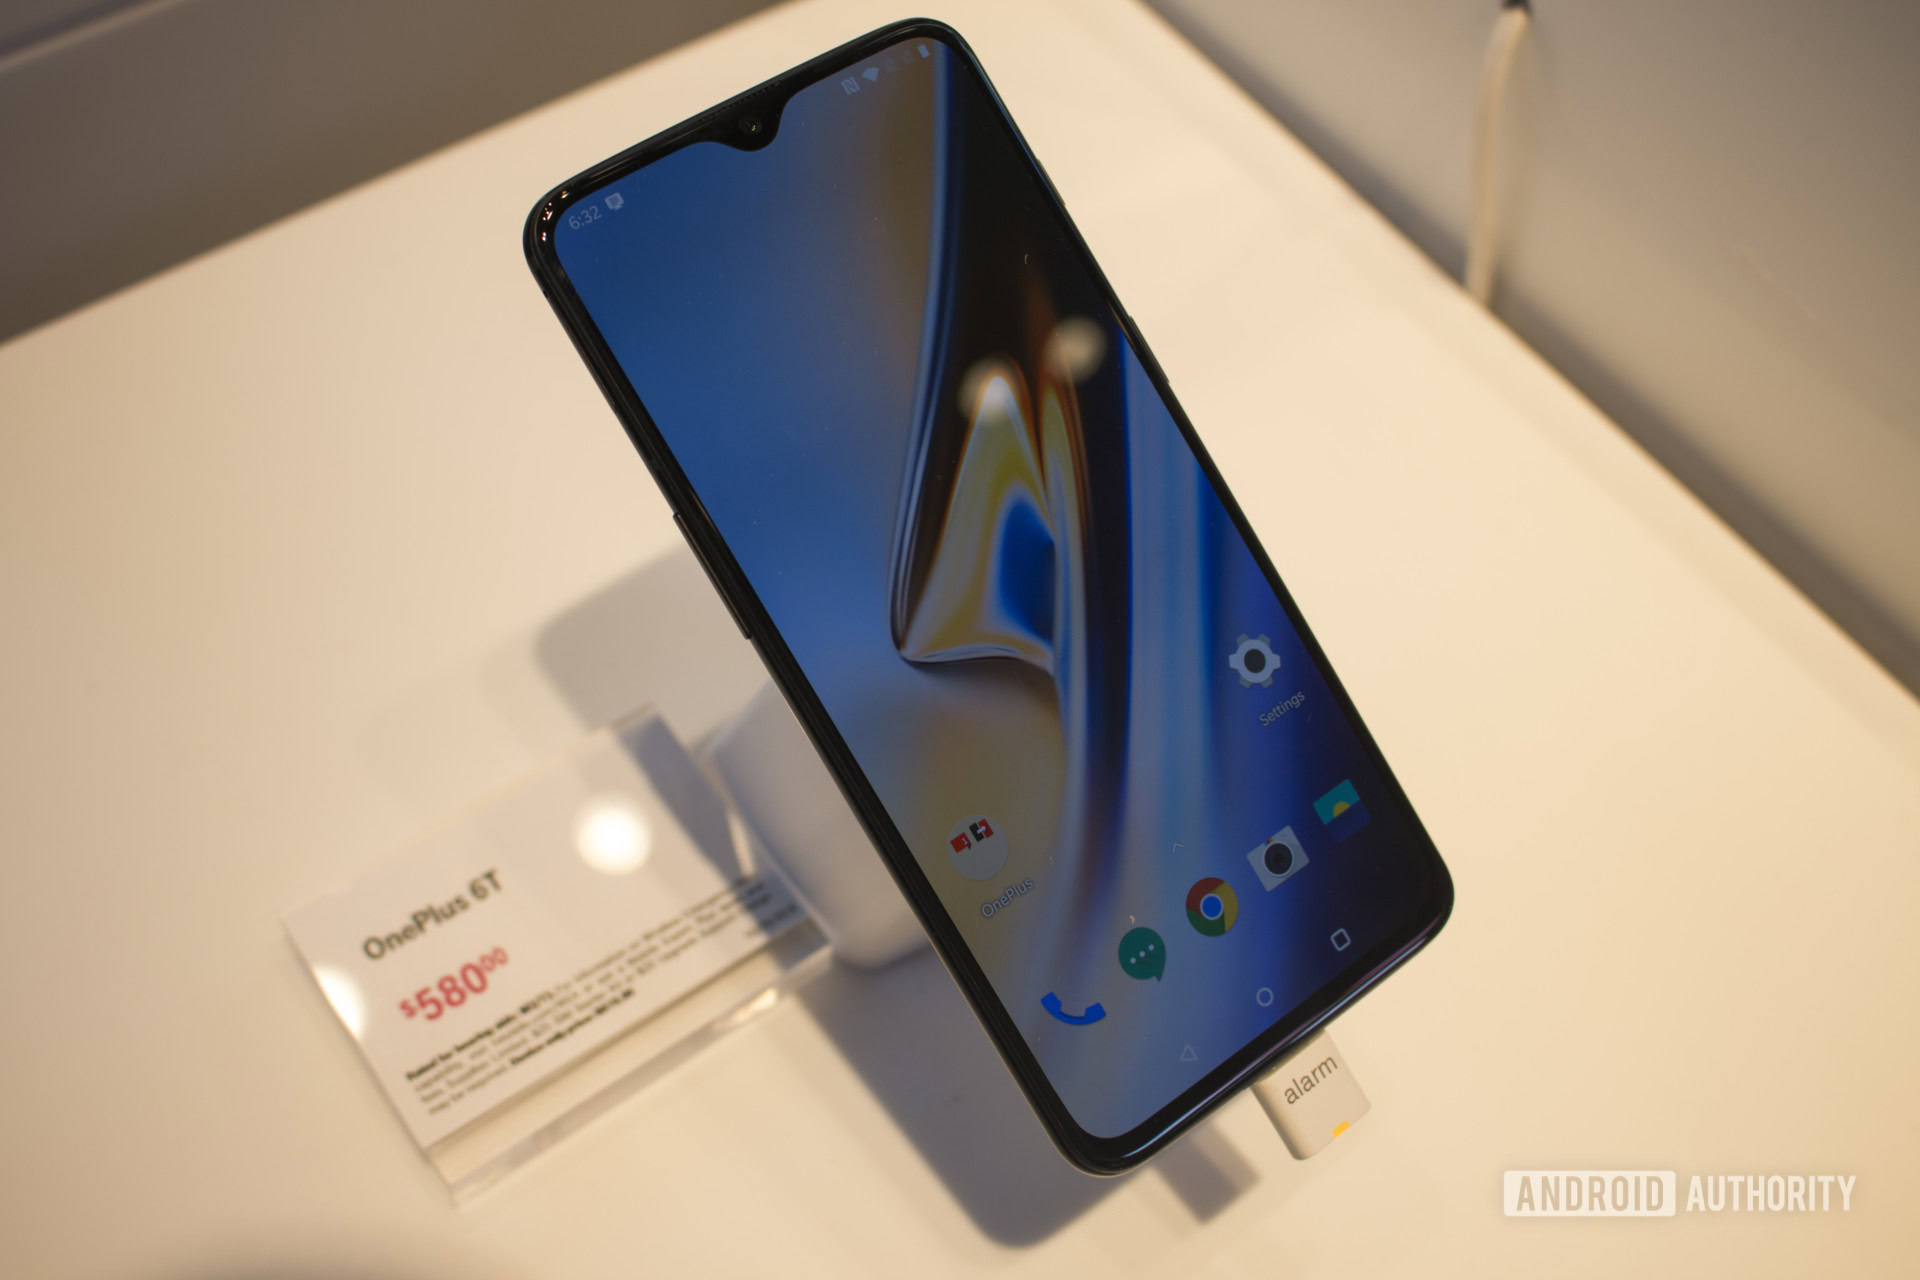 OnePlus 6T pop-up shop: My time with OnePlus fanatics